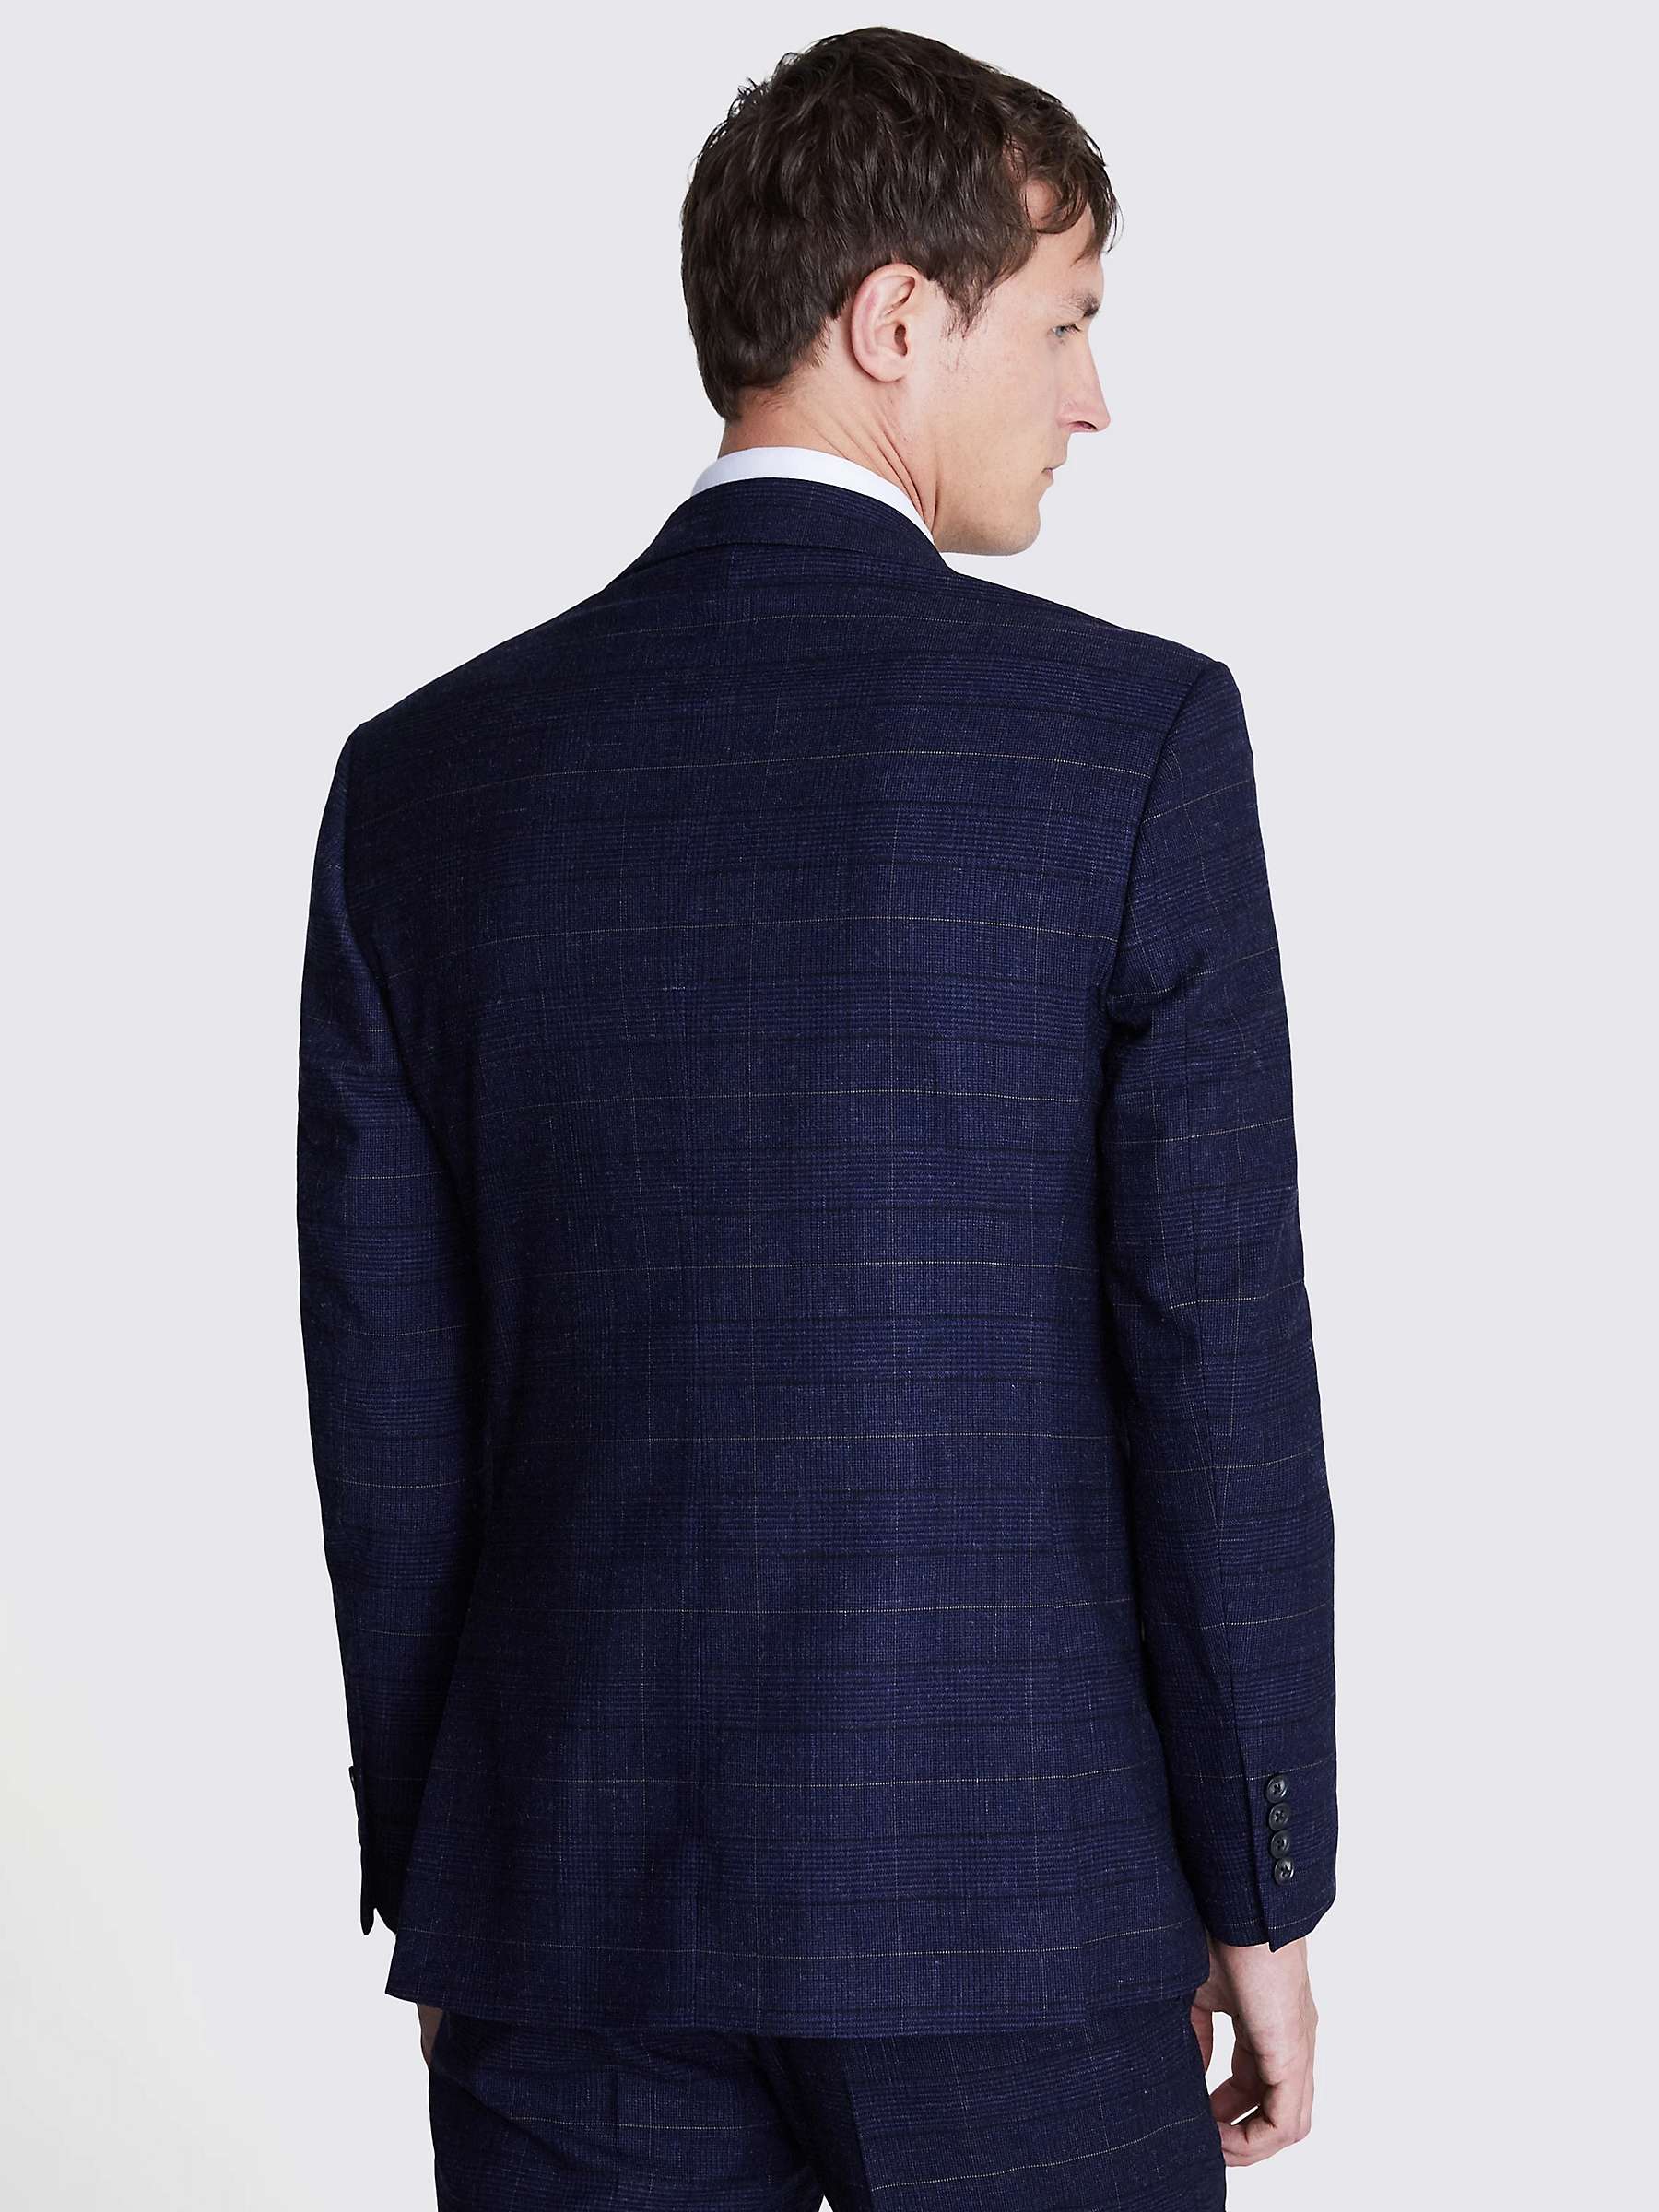 Buy Moss Tailored Fit Check Suit Jacket, Navy/Black Online at johnlewis.com